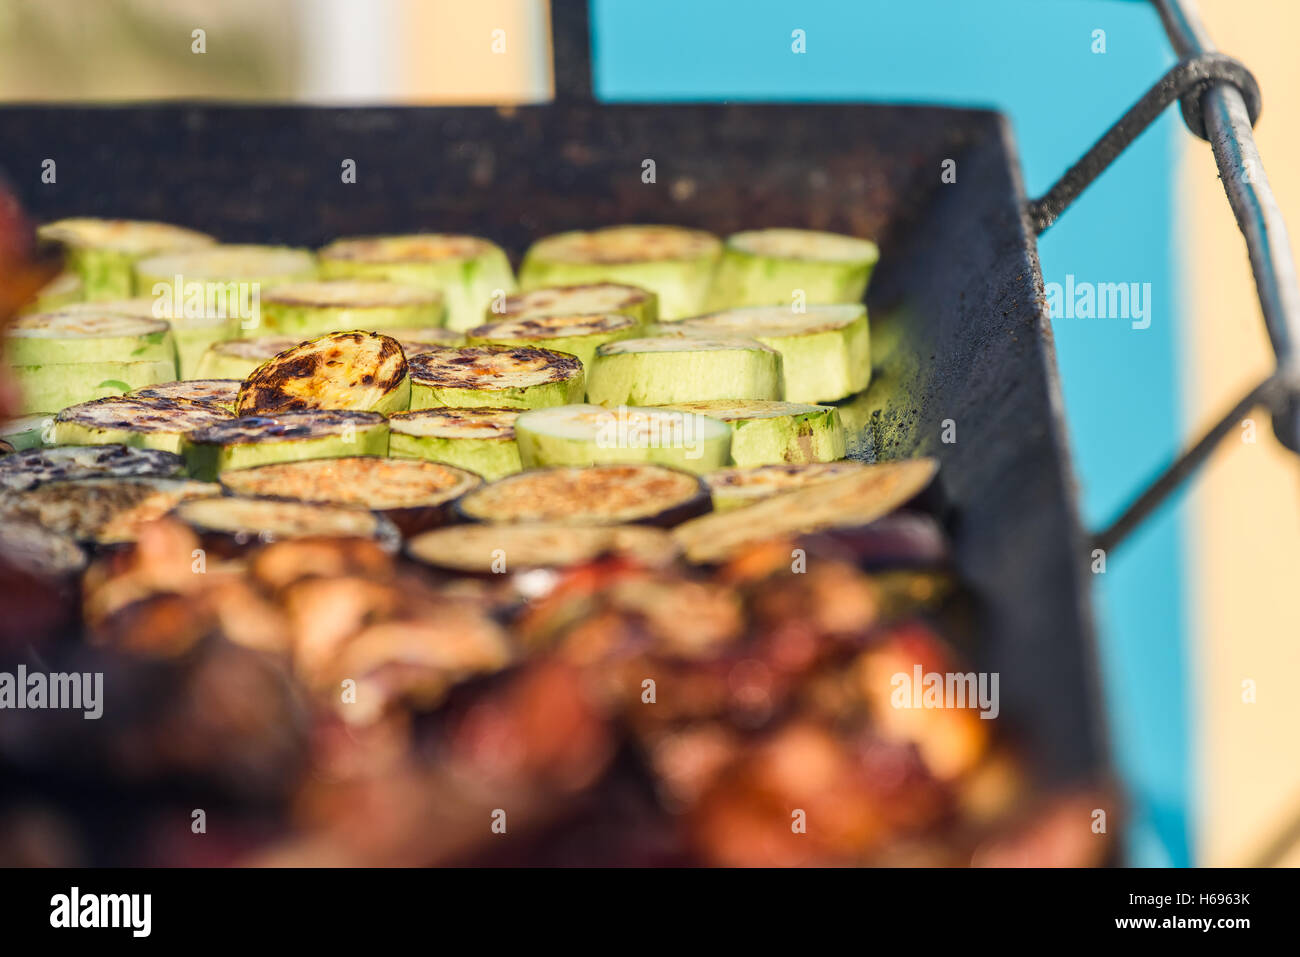 Preparing Grilled Vegetables On Barbecue Stock Photo